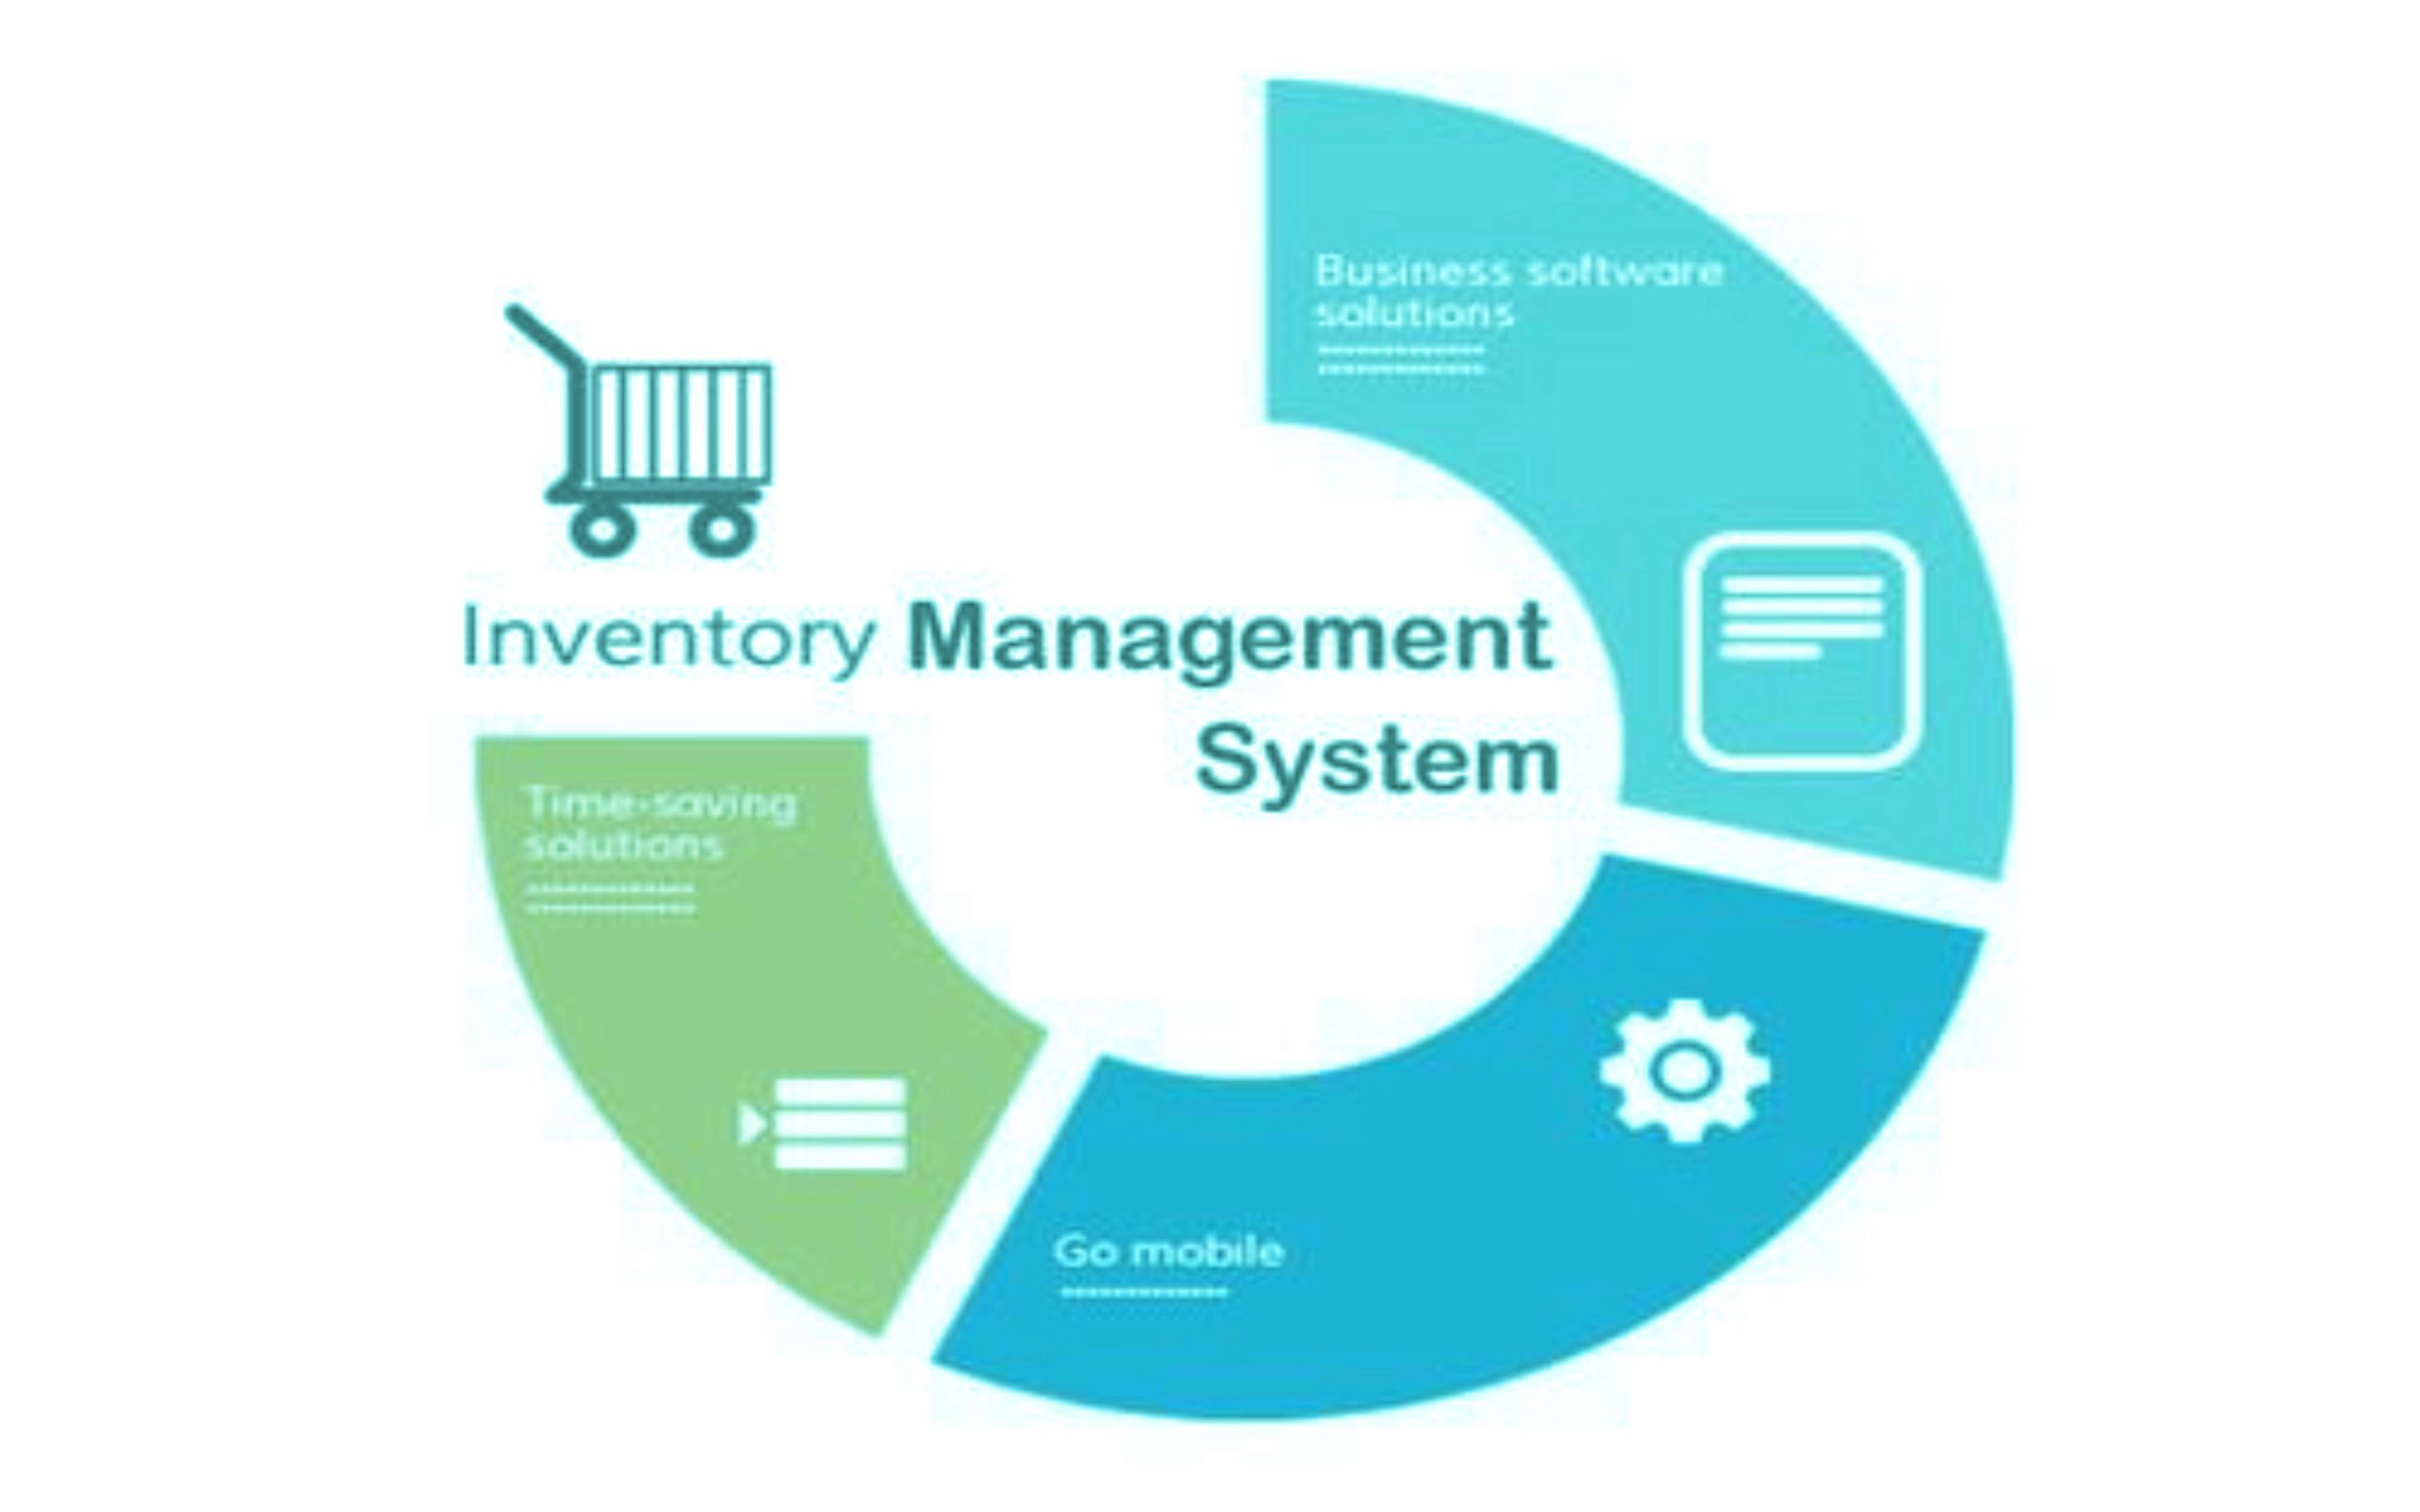 Achieving a Solid Inventory Management with a Good Inventory System